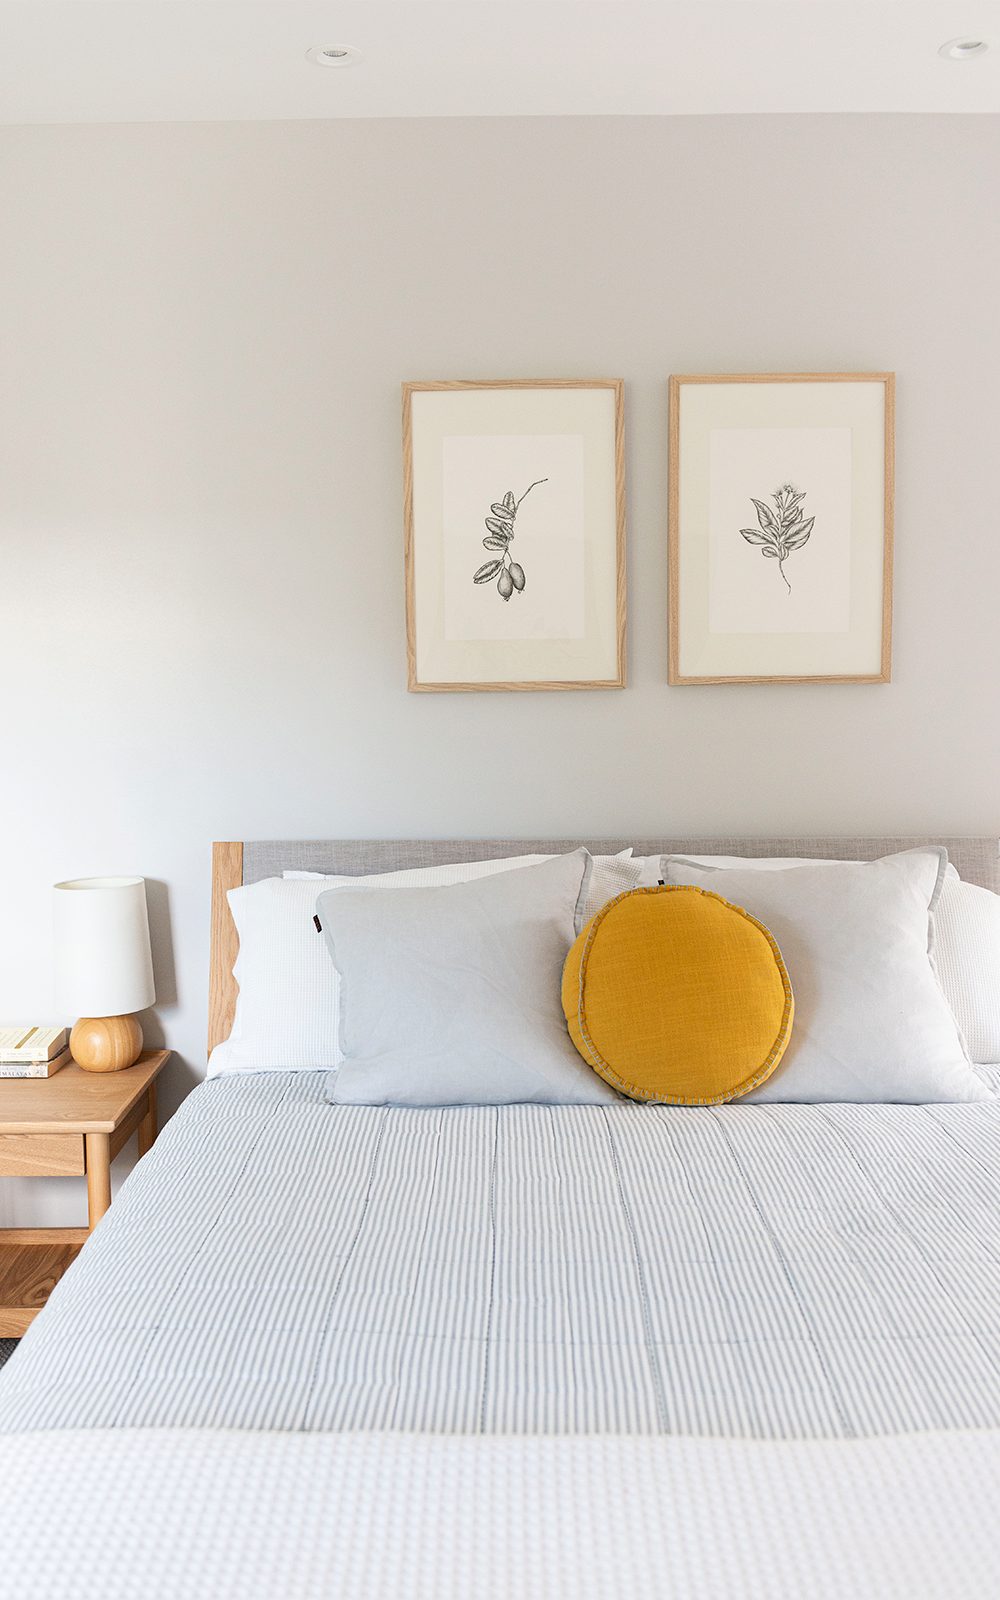 Bed with grey bedlinen, mustard coloured round pillow and two wooden framed artwork on the walls